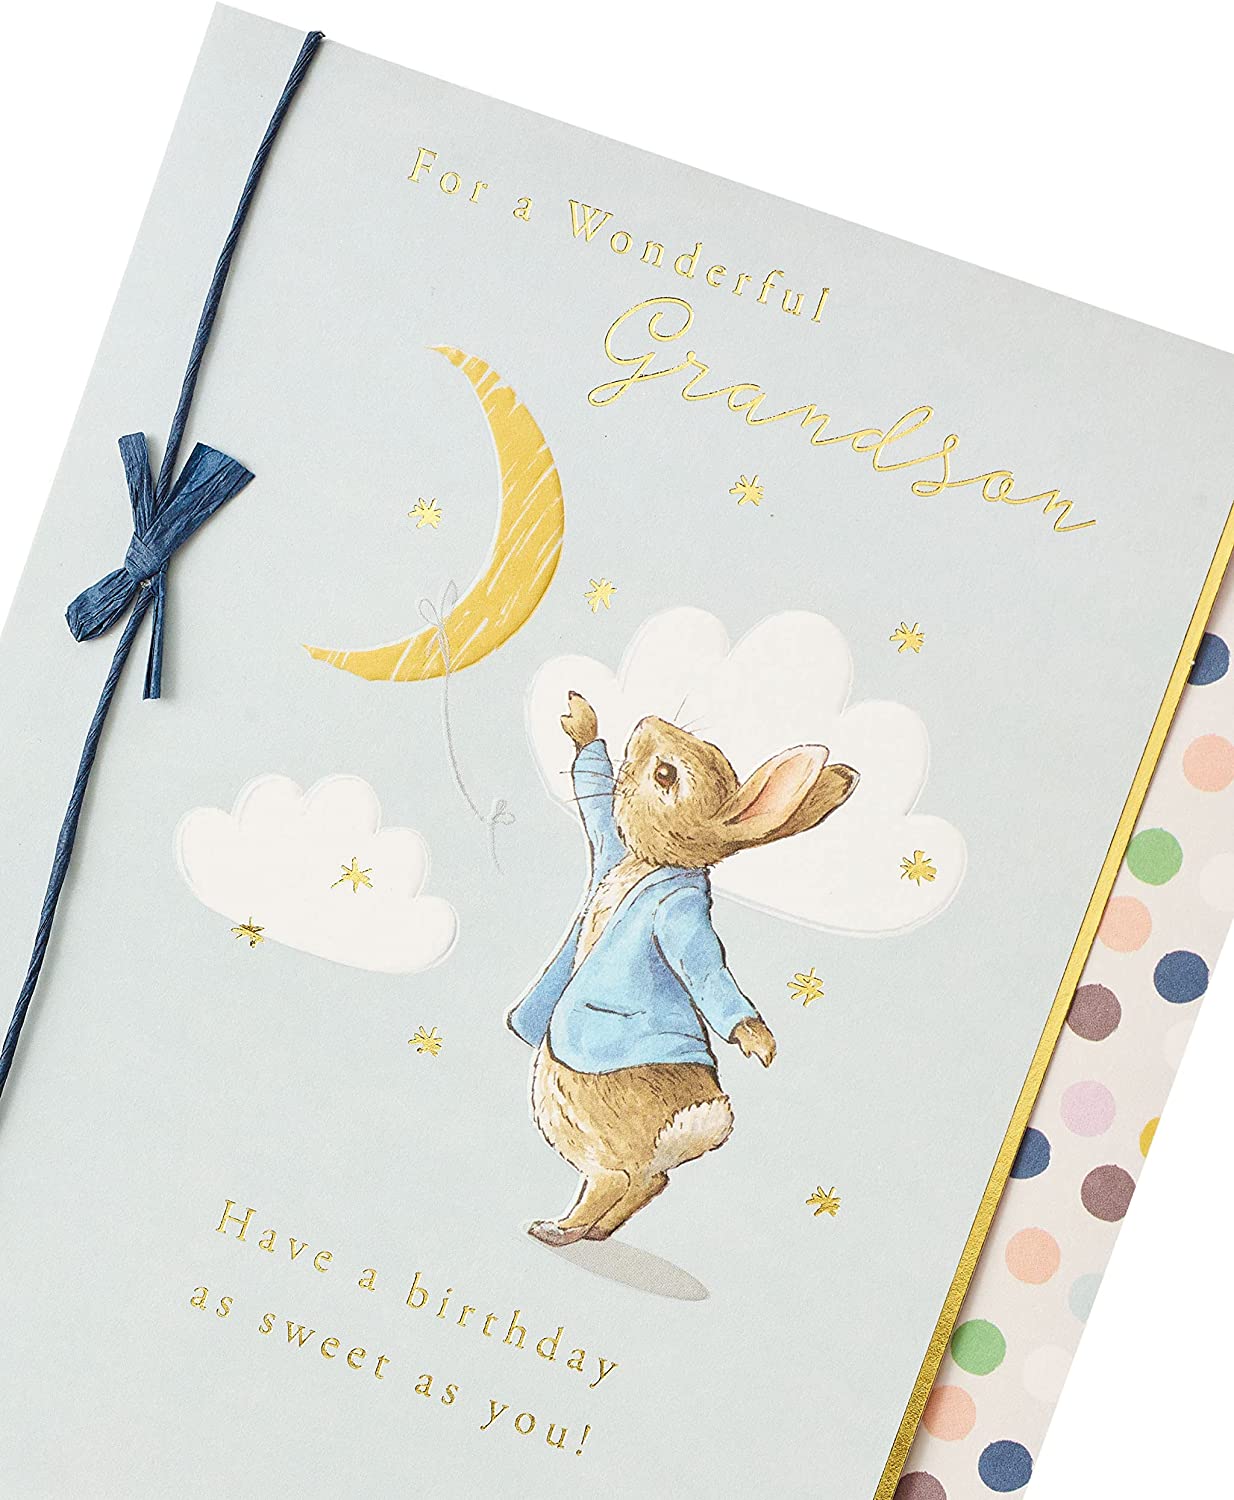 Peter Rabbit Birthday Card for Young Grandson